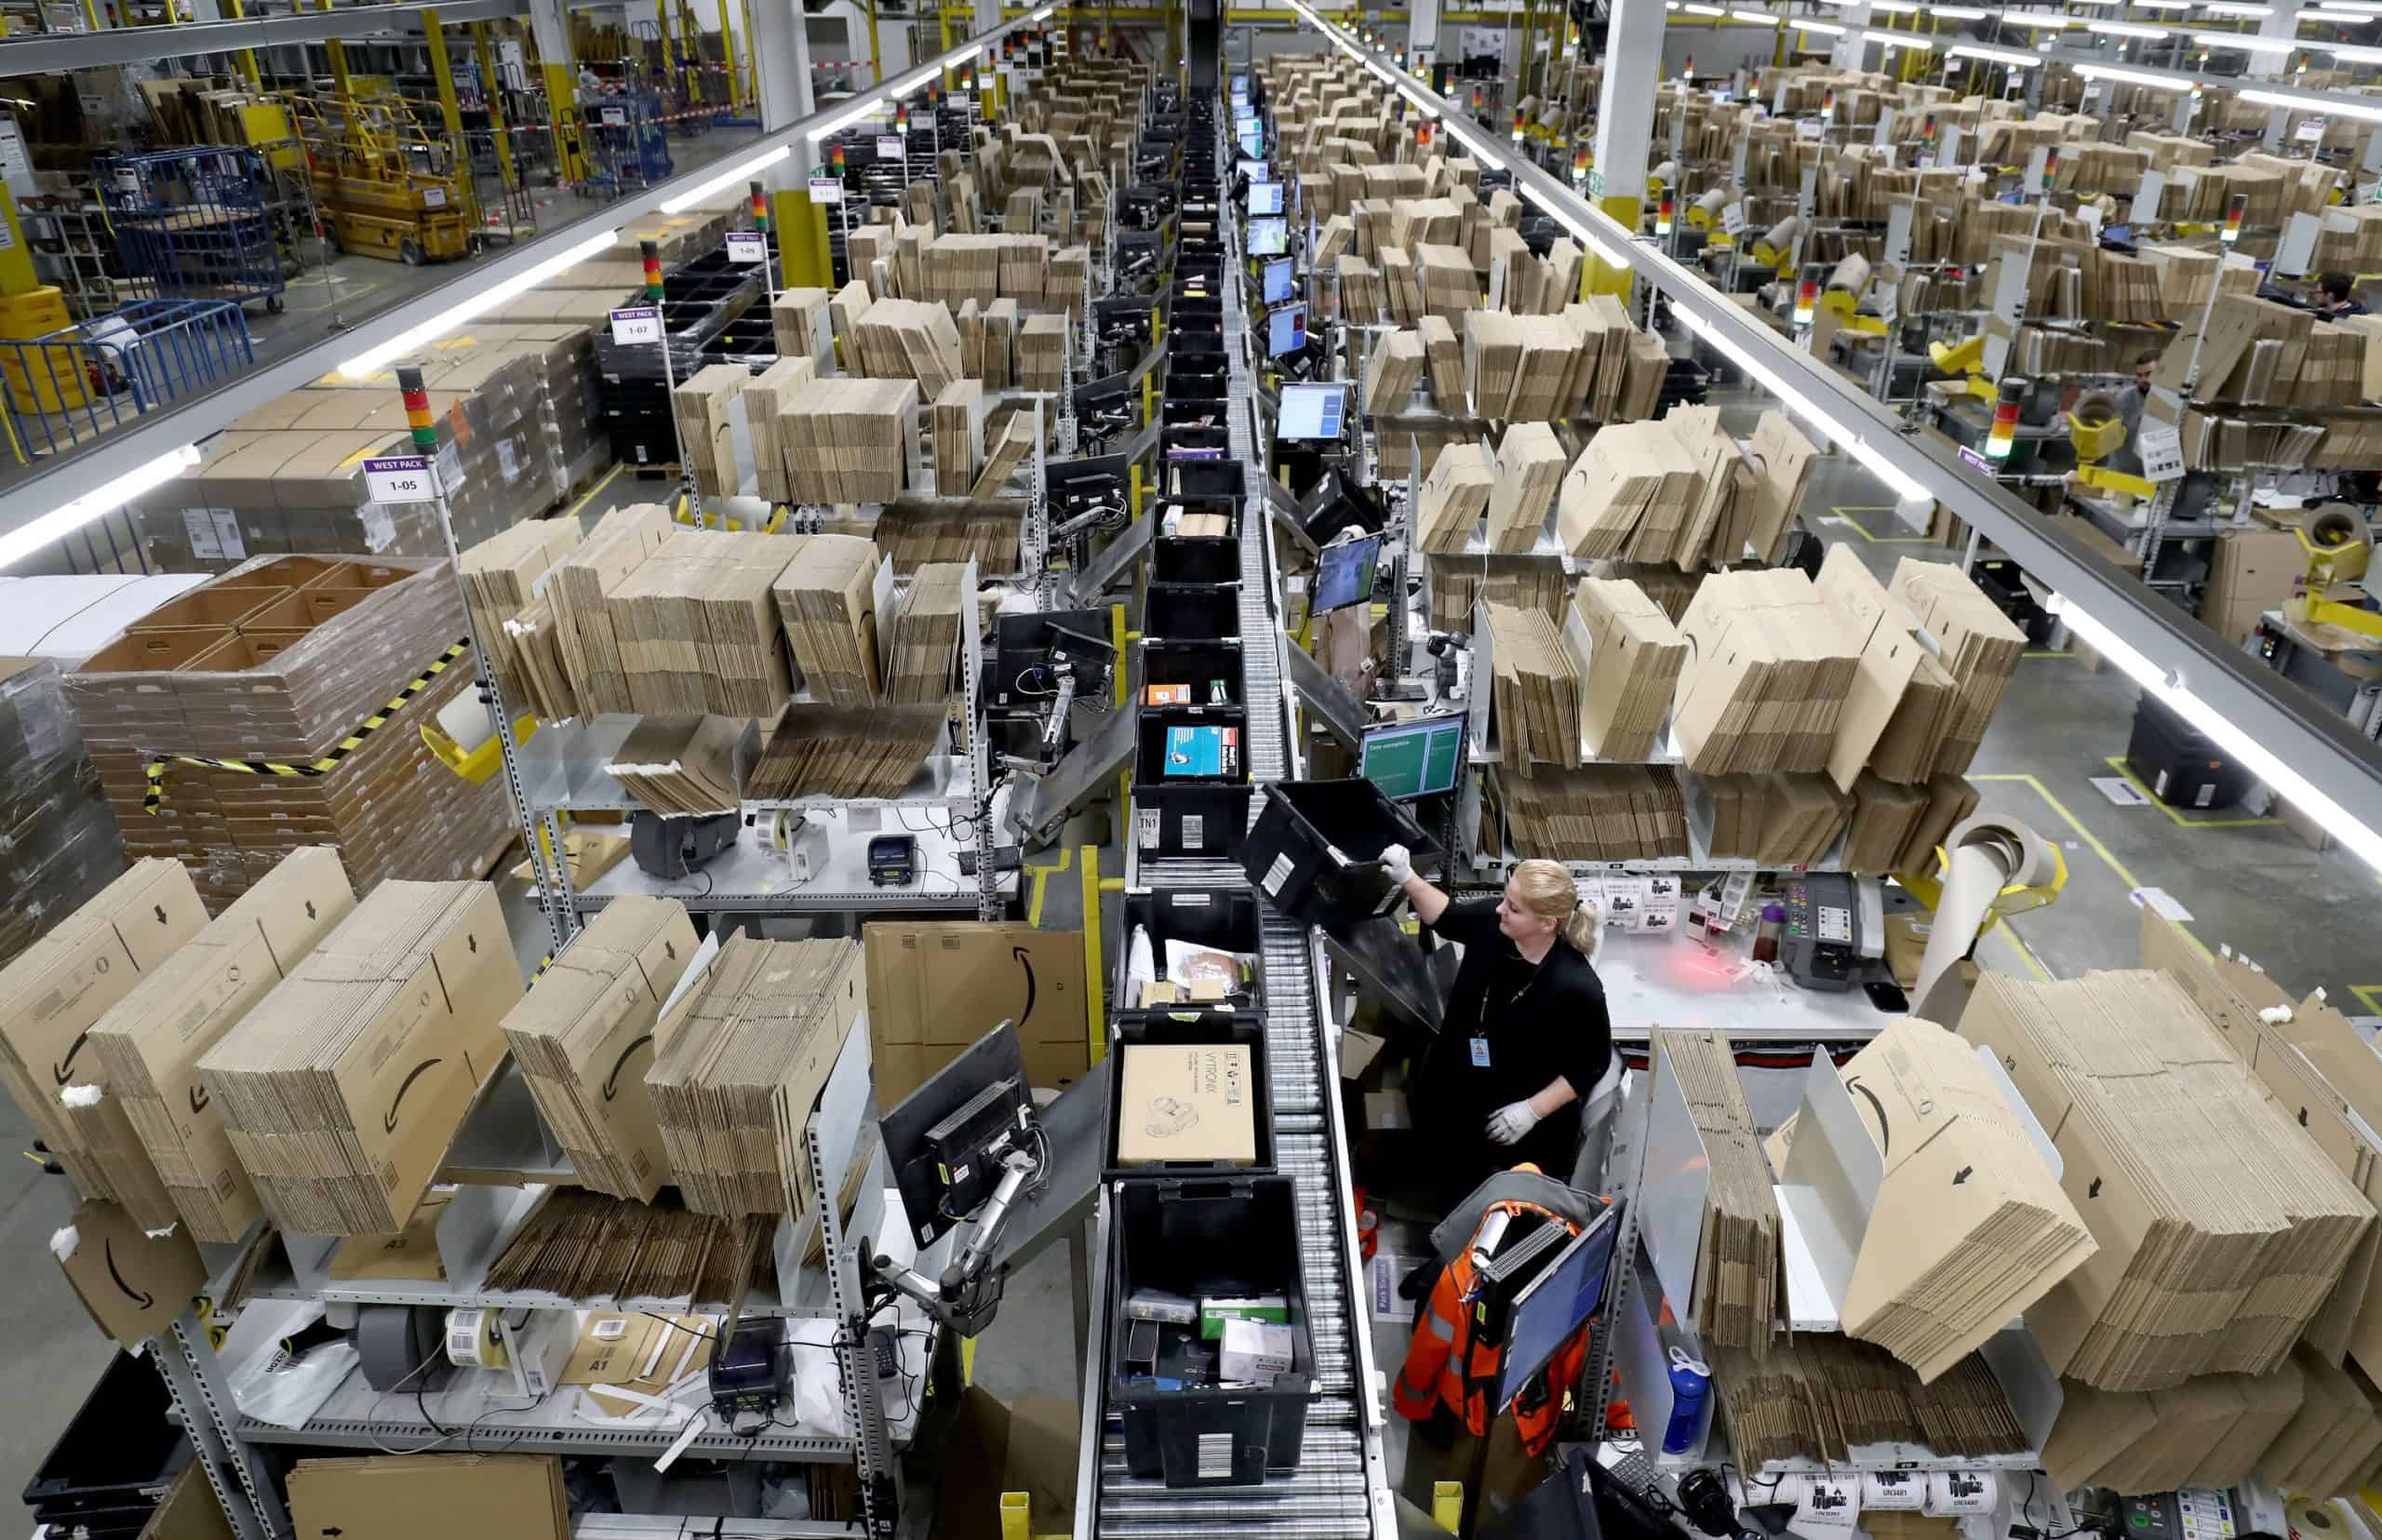 Undercover filming exposes mass destruction of products at Amazon warehouses